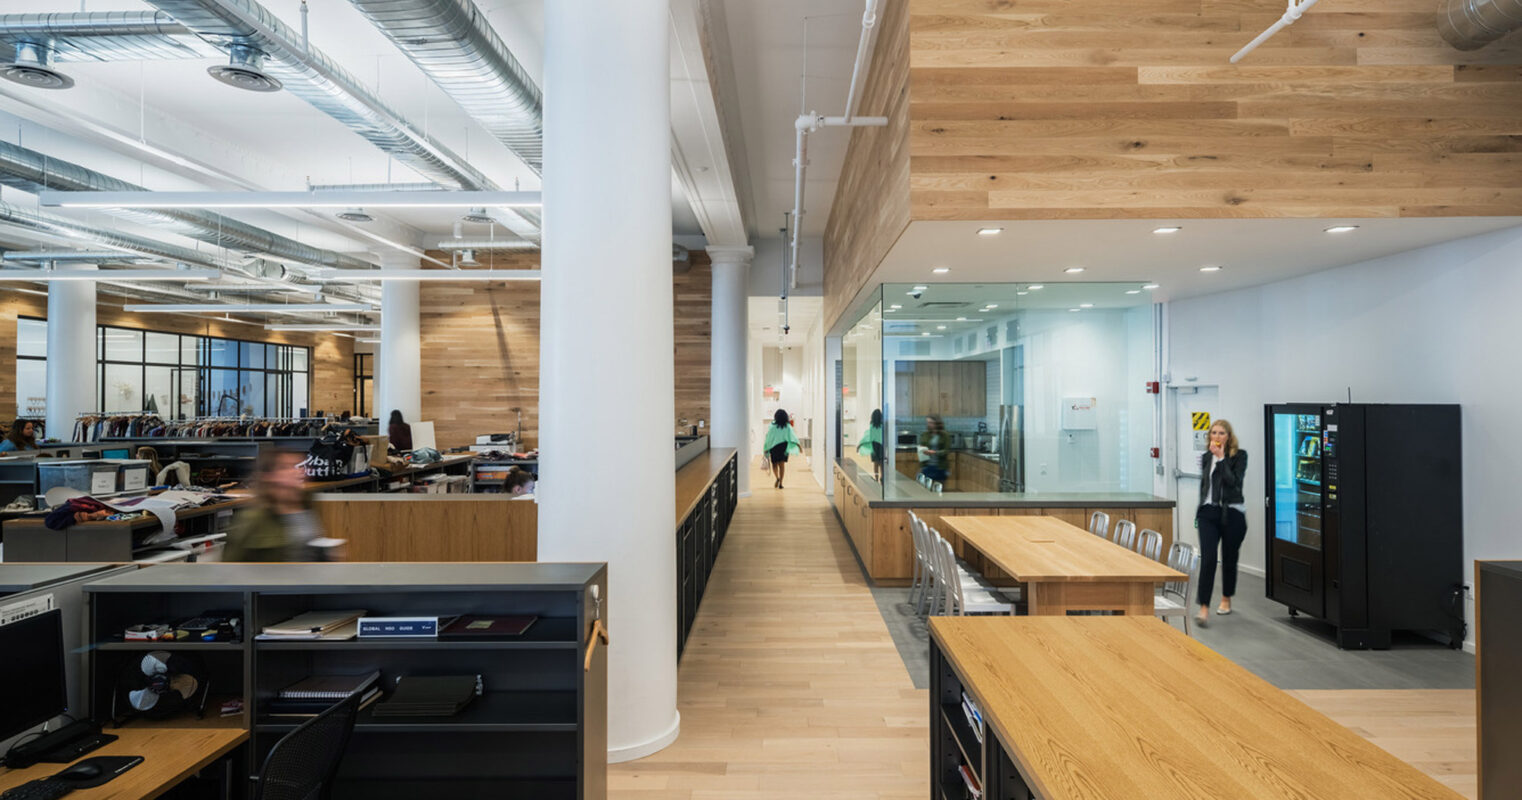 Open-plan office space with natural light featuring exposed ductwork, wooden beams, and communal worktables. Sleek black filing cabinets contrast with light wood floors, enhancing the modern industrial aesthetic.